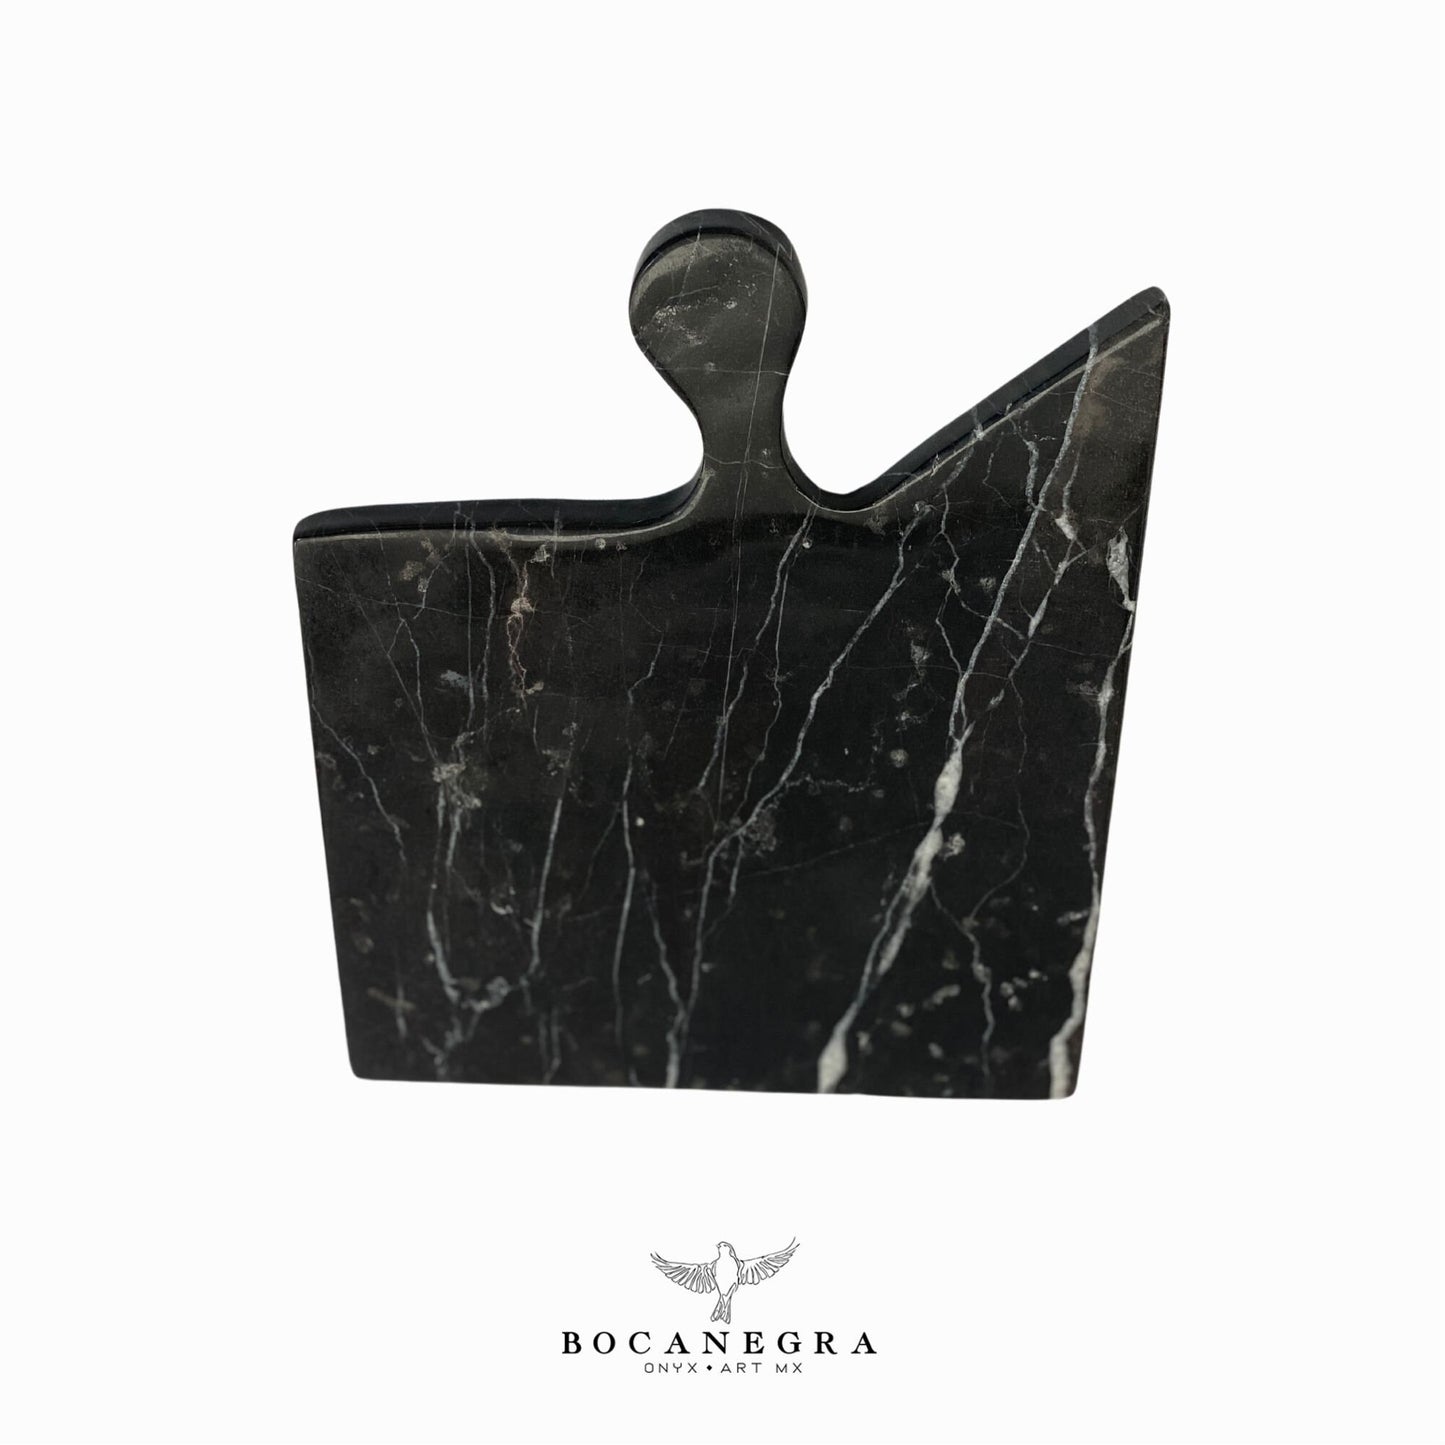 Black Marble Cheese Cutting Board - Serving board